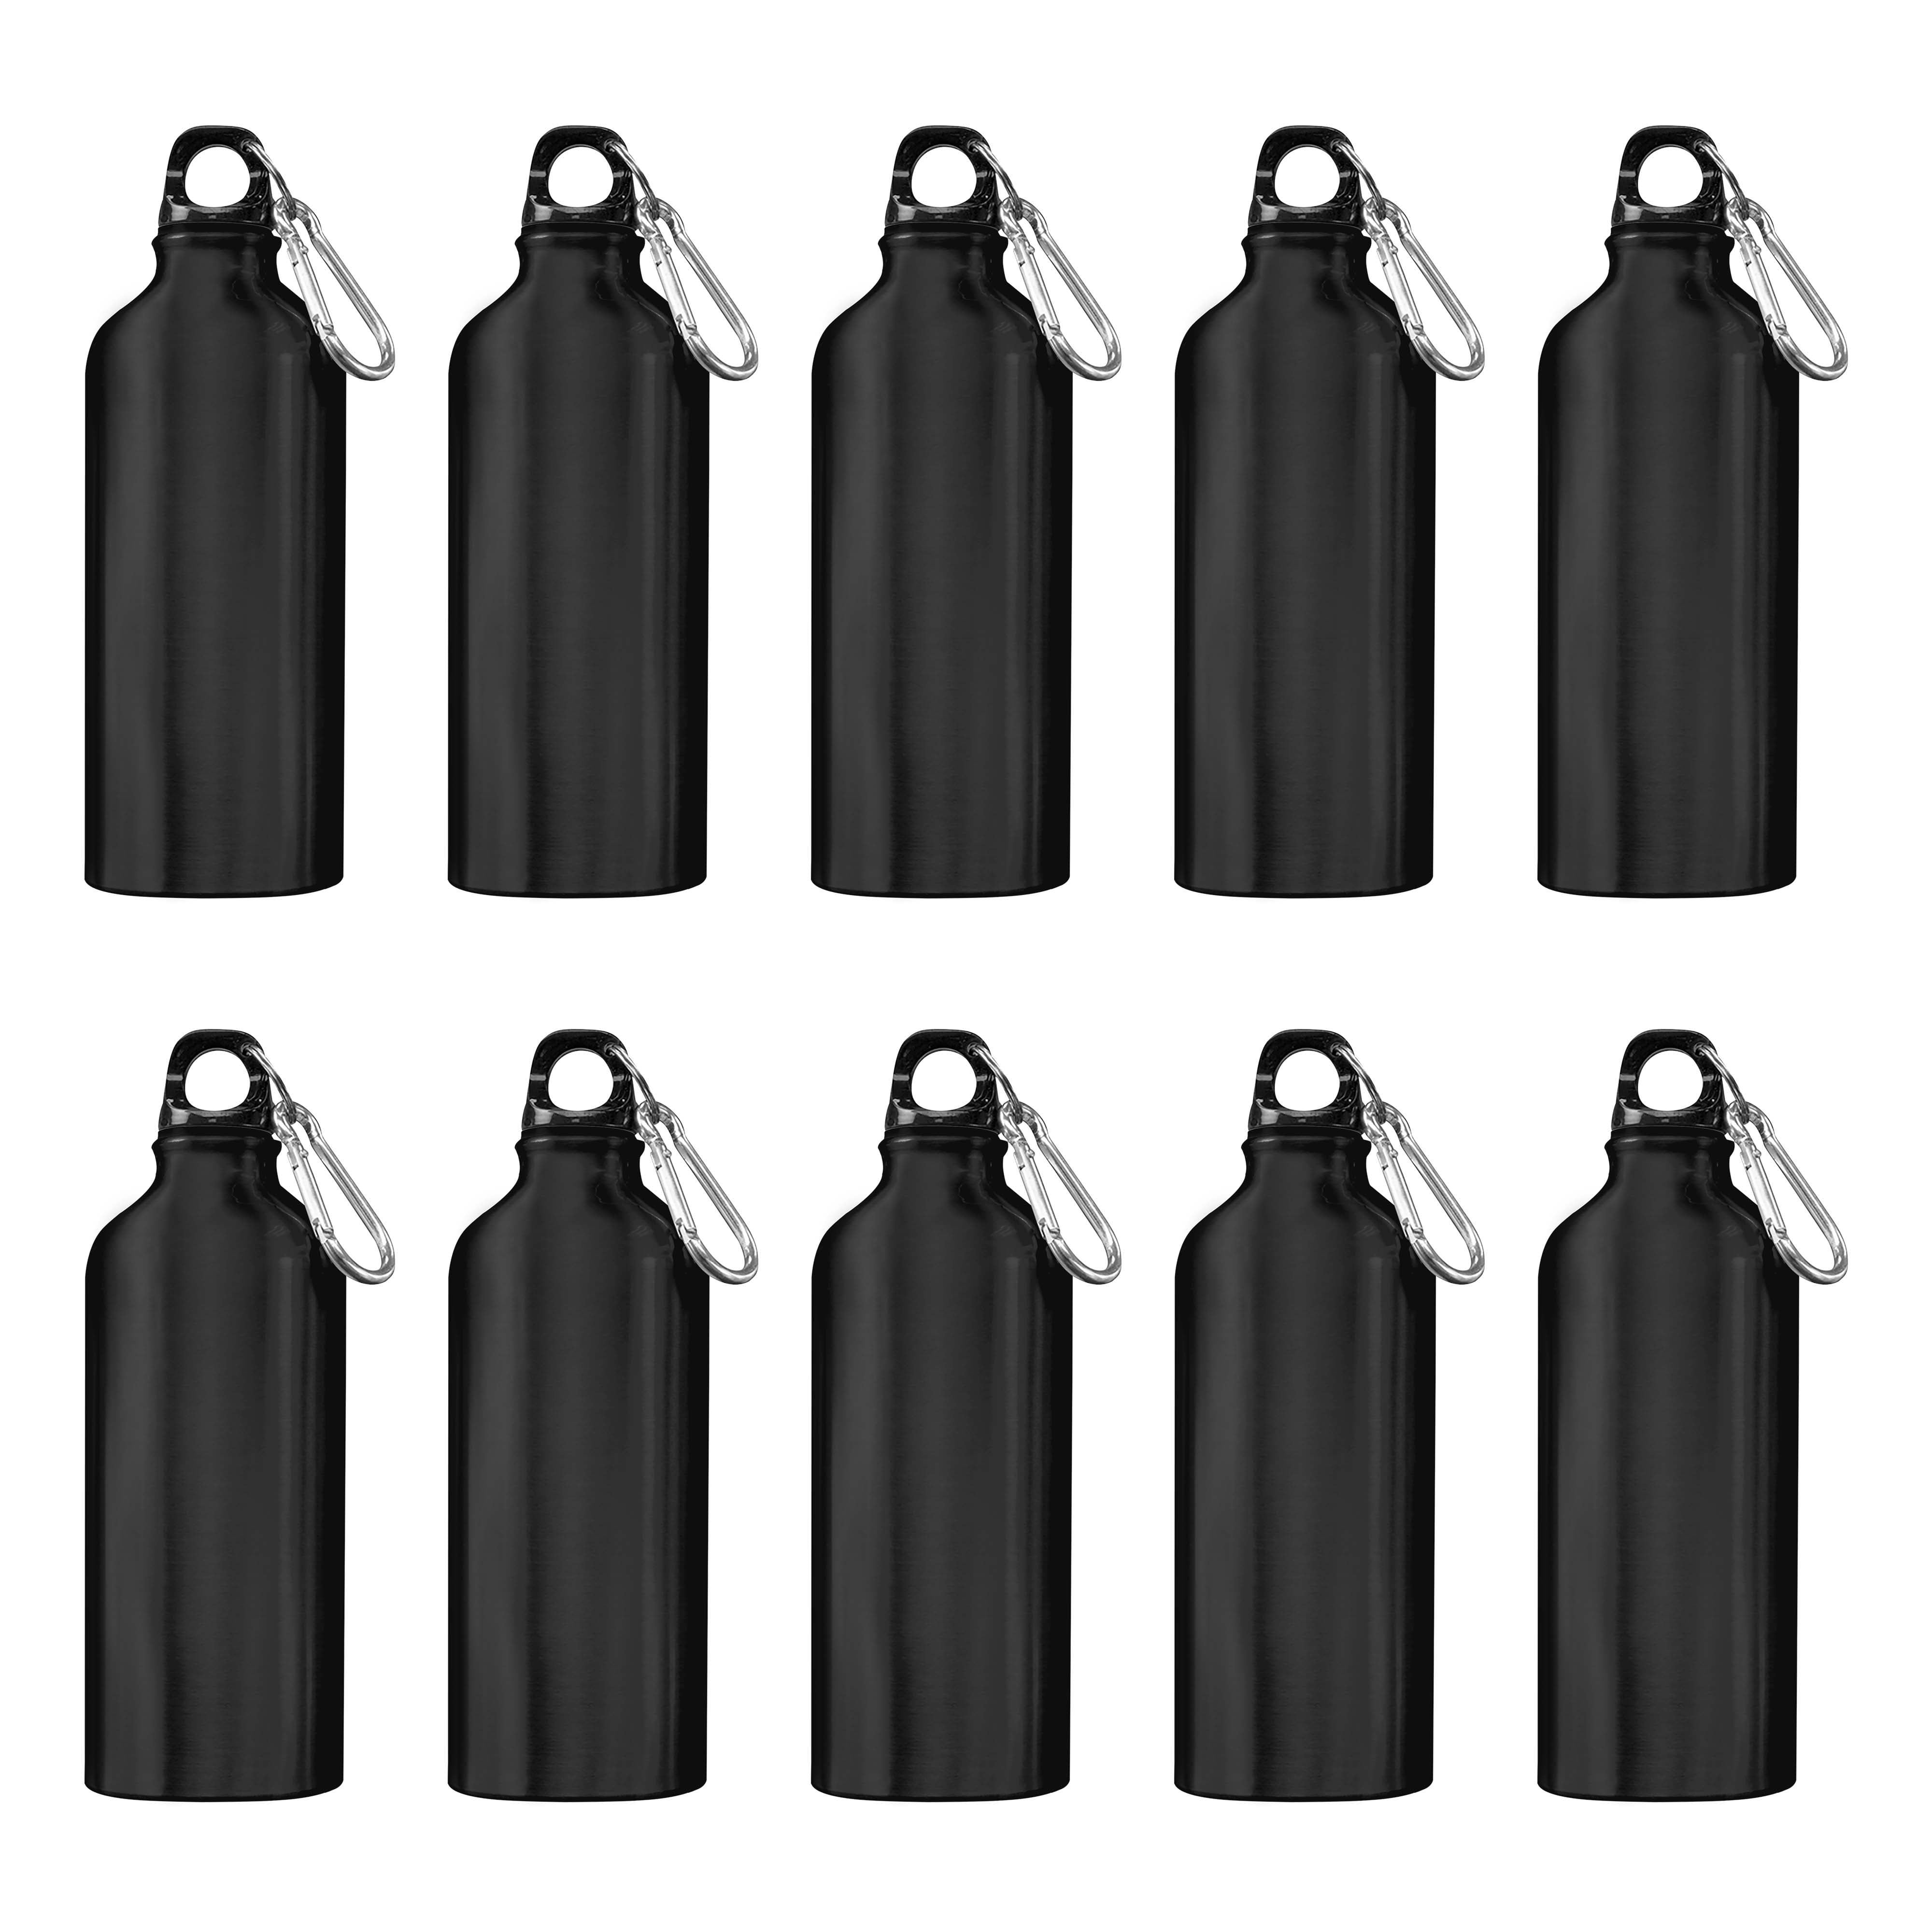 CSBD 20 oz. Bulk Water Bottles, Made in USA, Blank Plastic Reusable Water  Bottles for Gym, Cycling, …See more CSBD 20 oz. Bulk Water Bottles, Made in